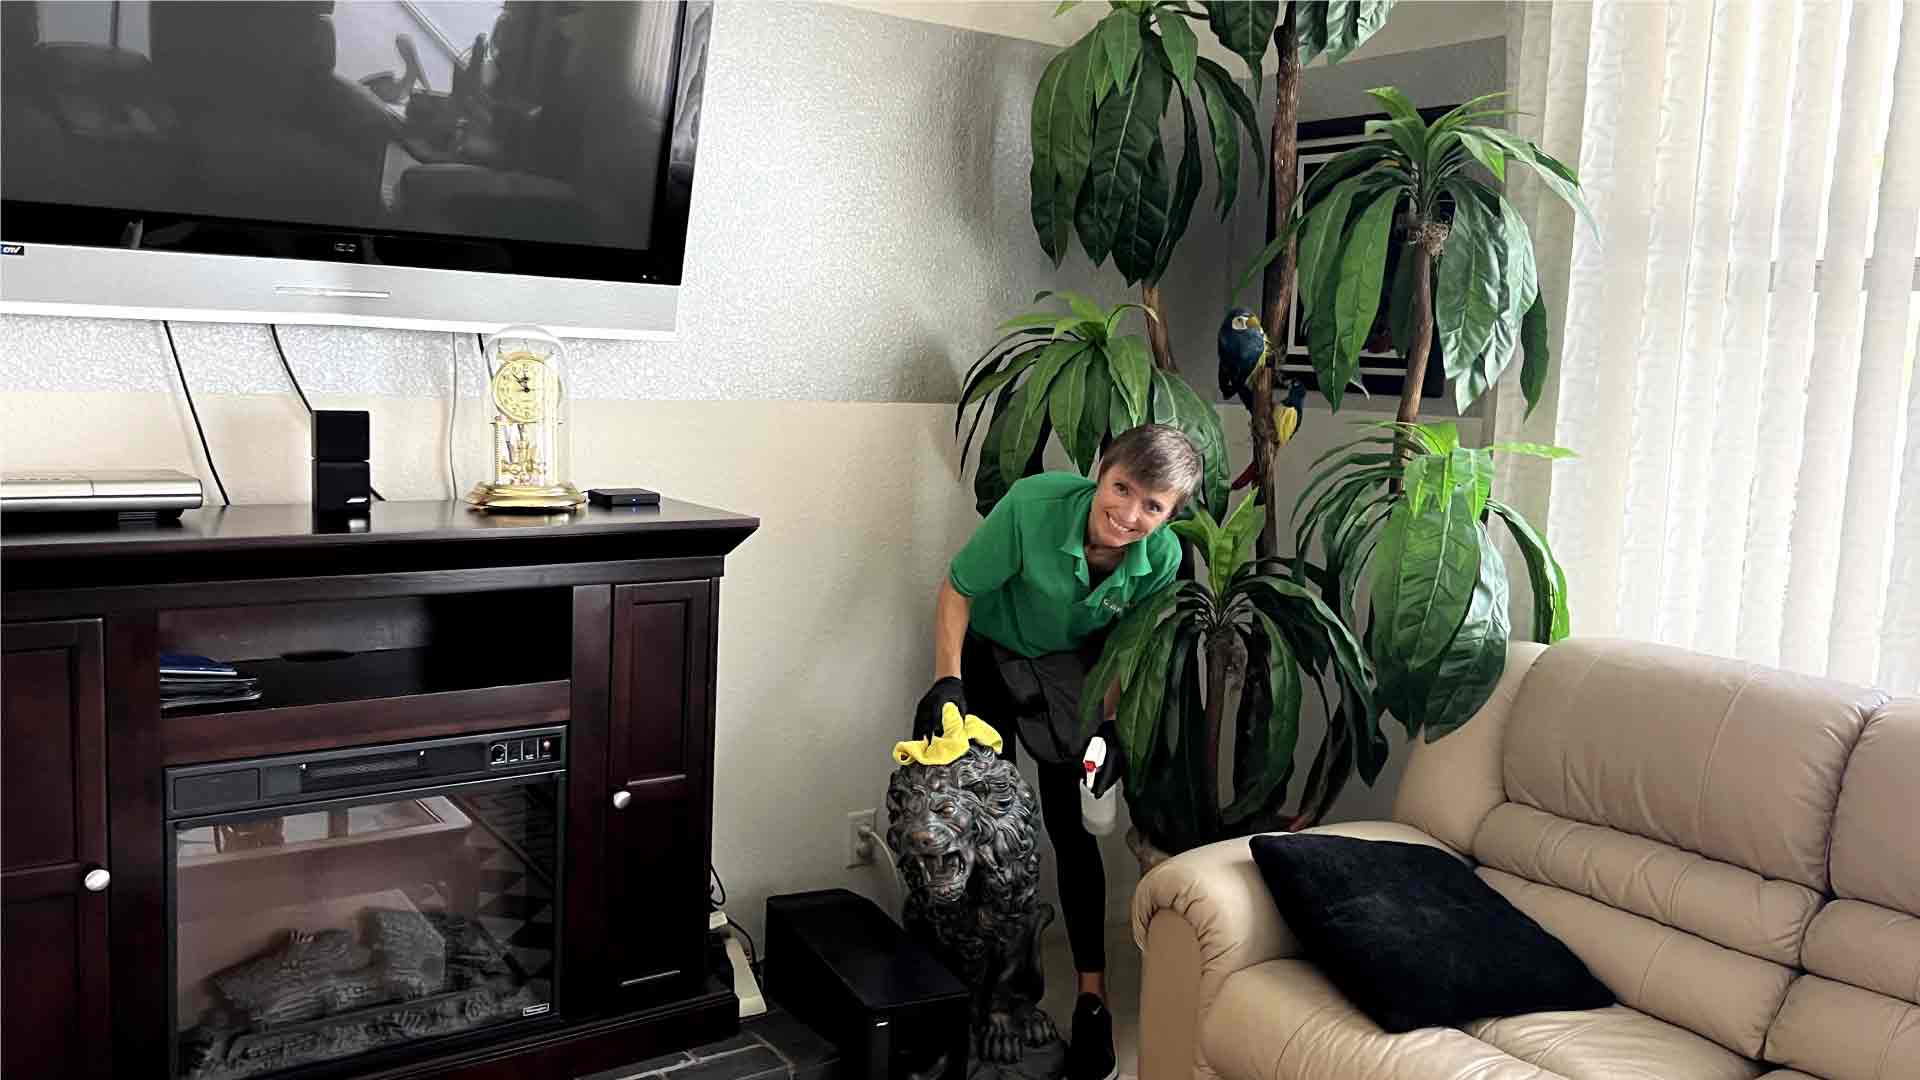 Interior details cleaning - Regular cleaning in Cape Coral by Goldmillio - Feb 26